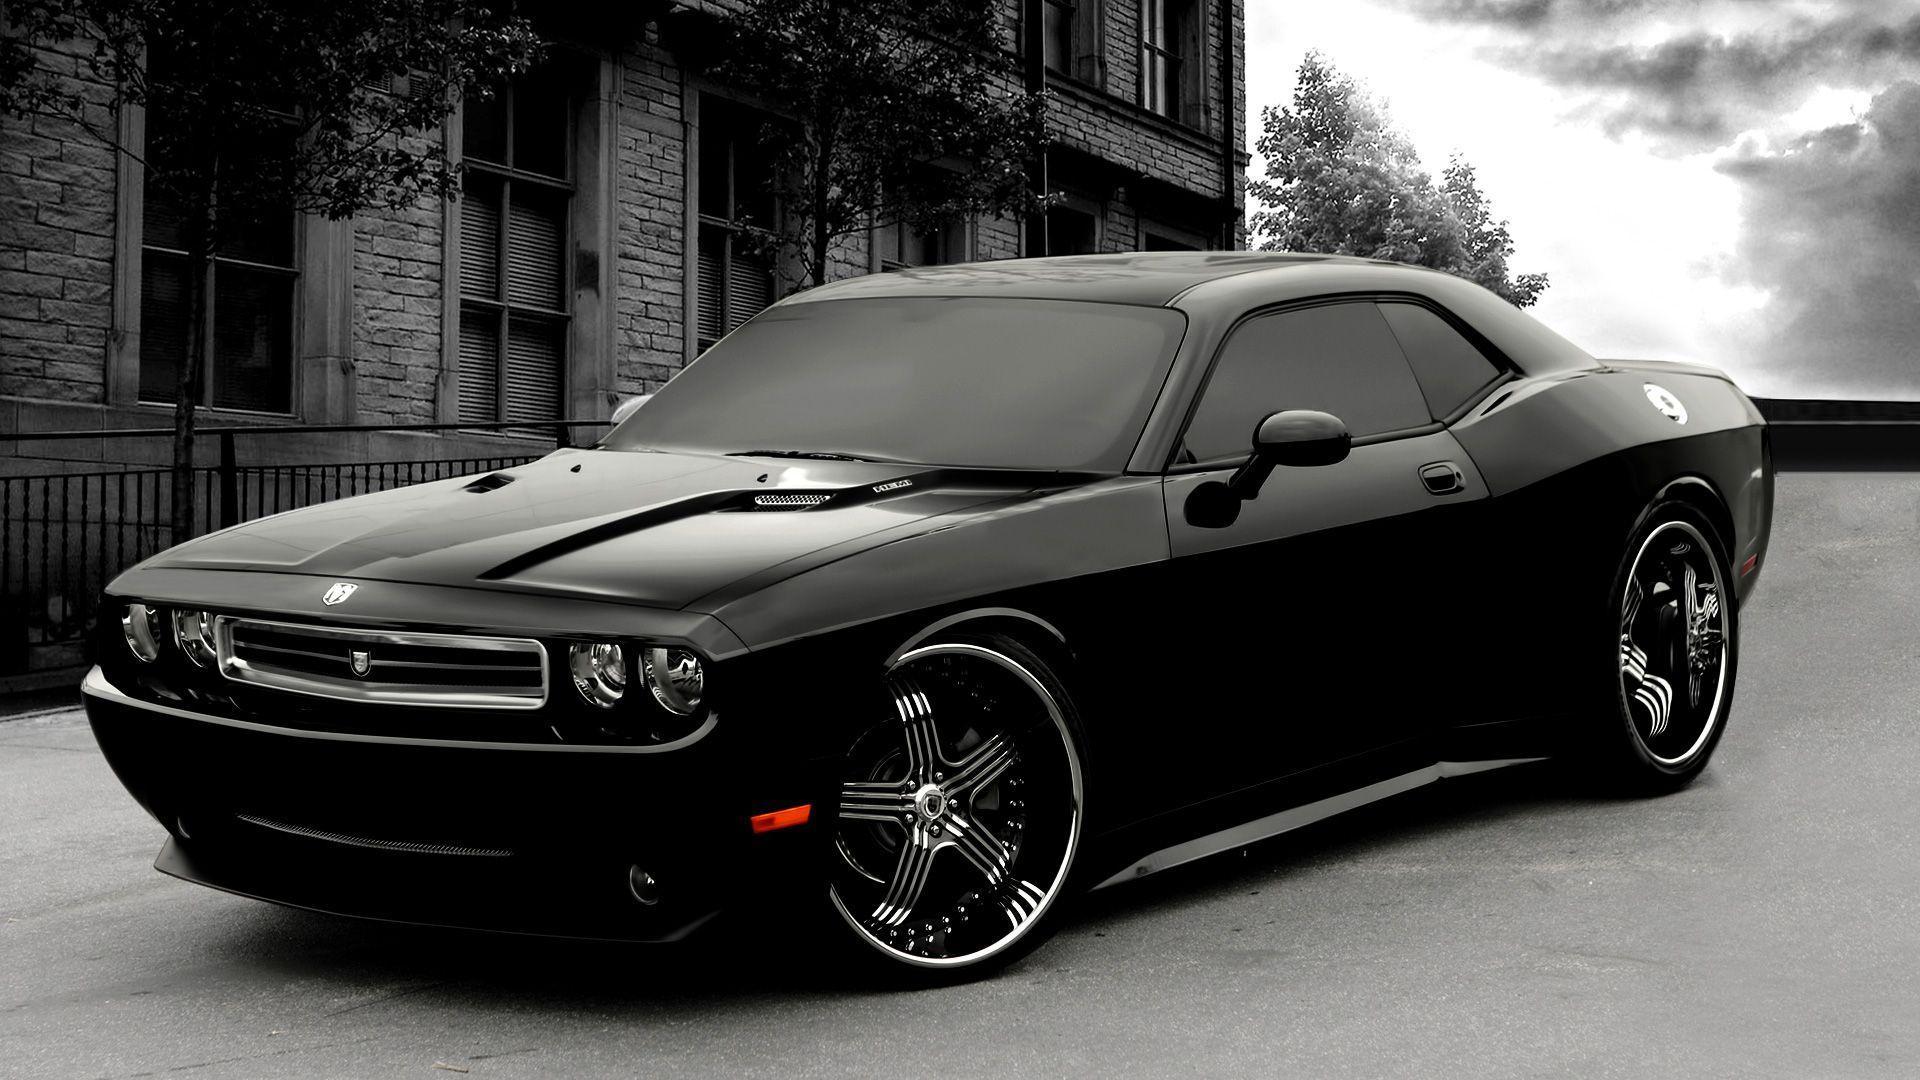 Amazing Dodge Challenger HD Wallpapers Wallpapers Themes